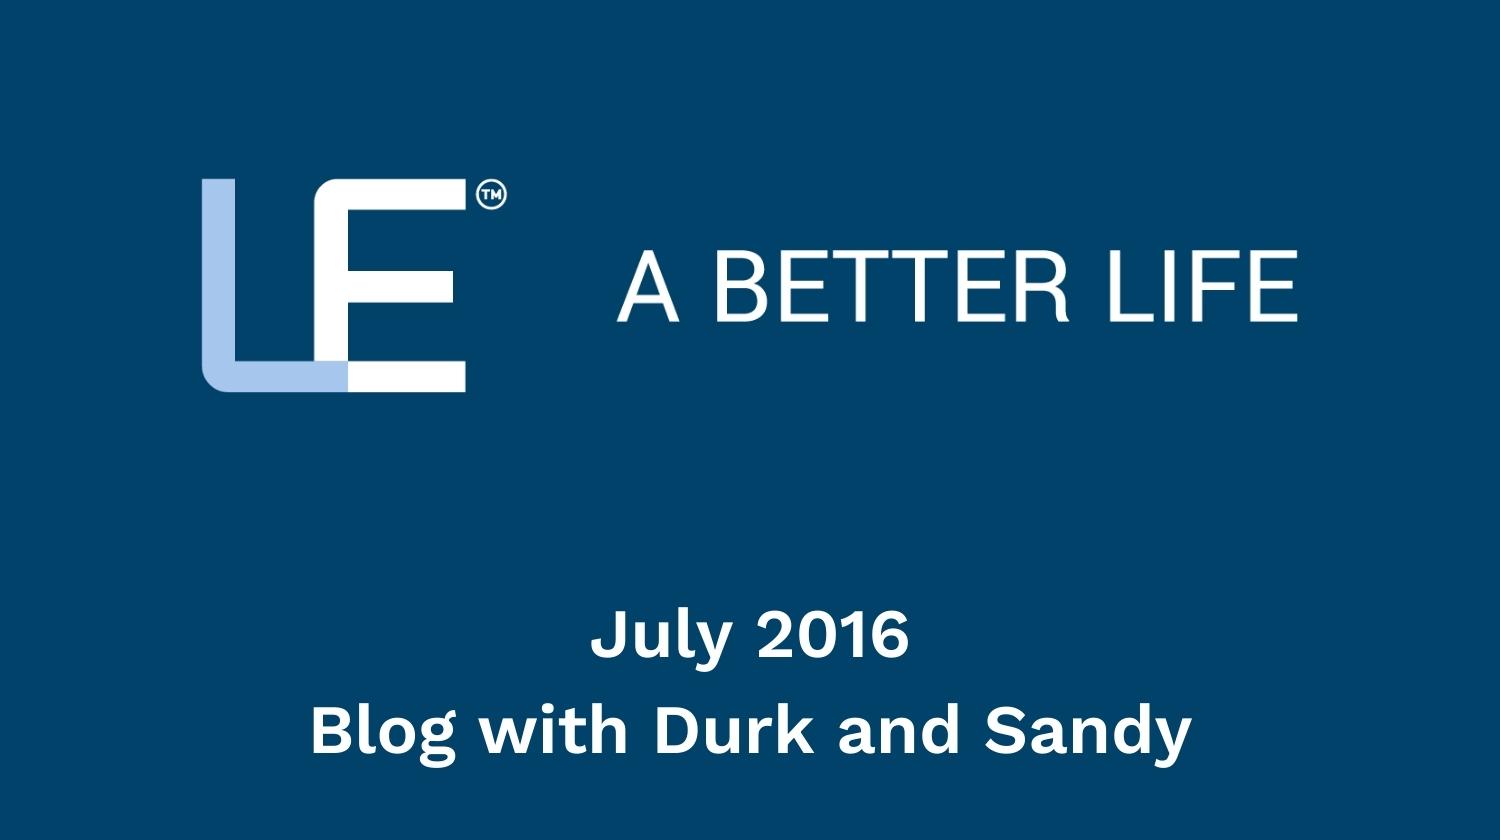 July 2016 Blog with Durk and Sandy